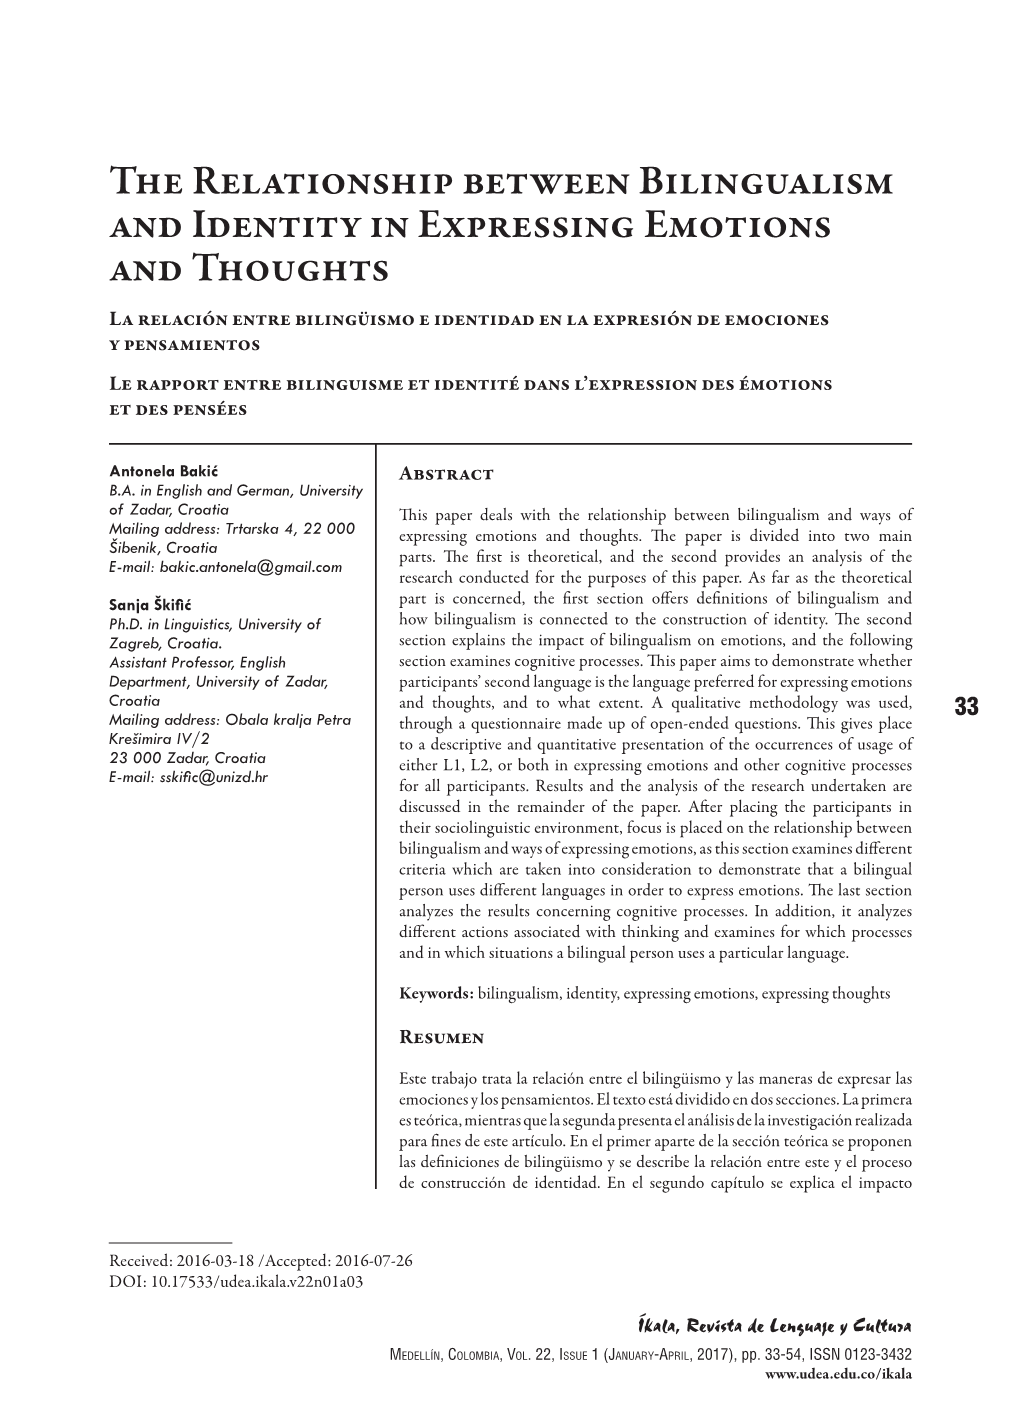 The Relationship Between Bilingualism and Identity in Expressing Emotions and Thoughts